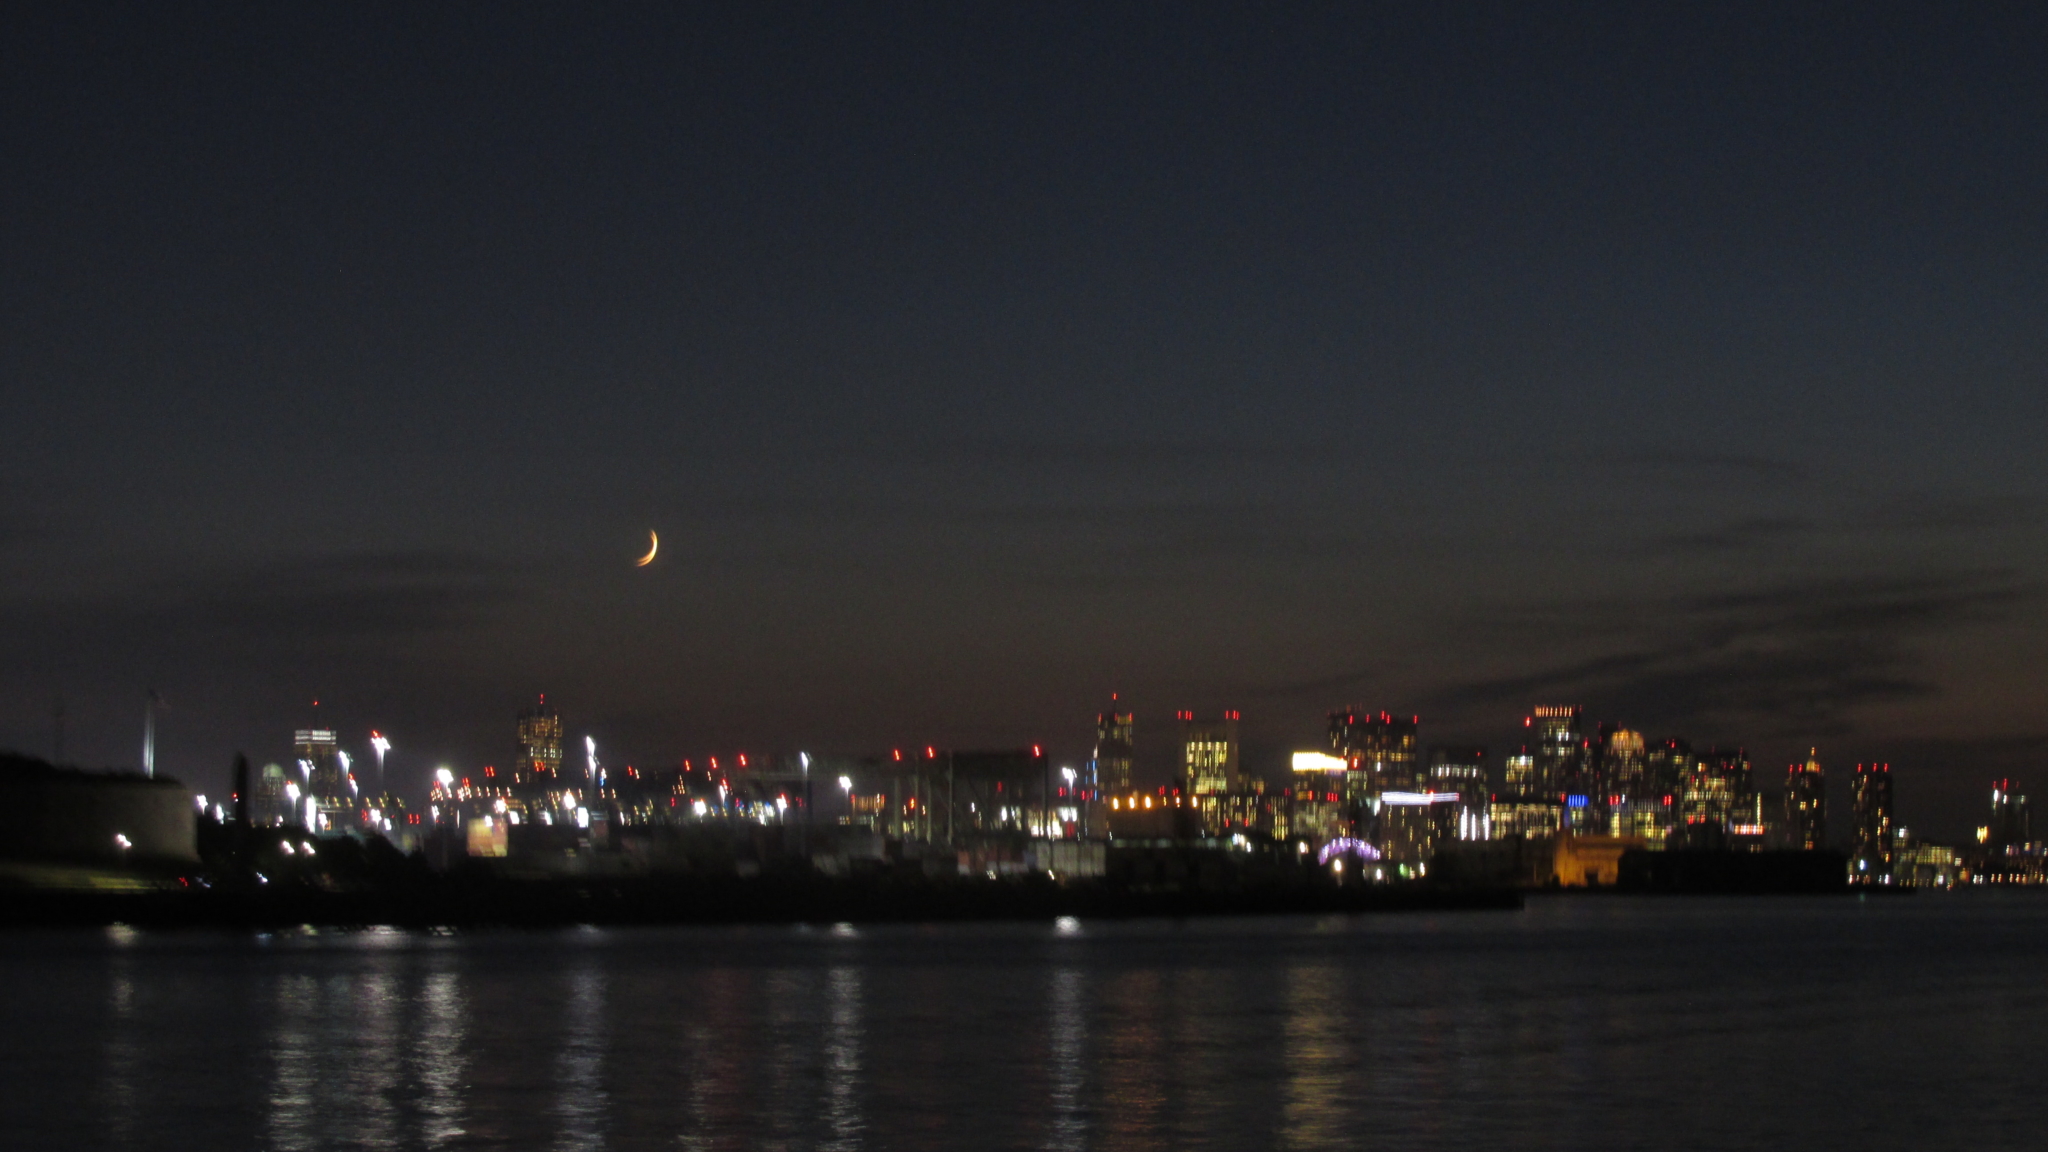 A portion of Boston’s skyline under a sliver of a crescent moon, as the Boys & Girls Club Cruise draws to a close.